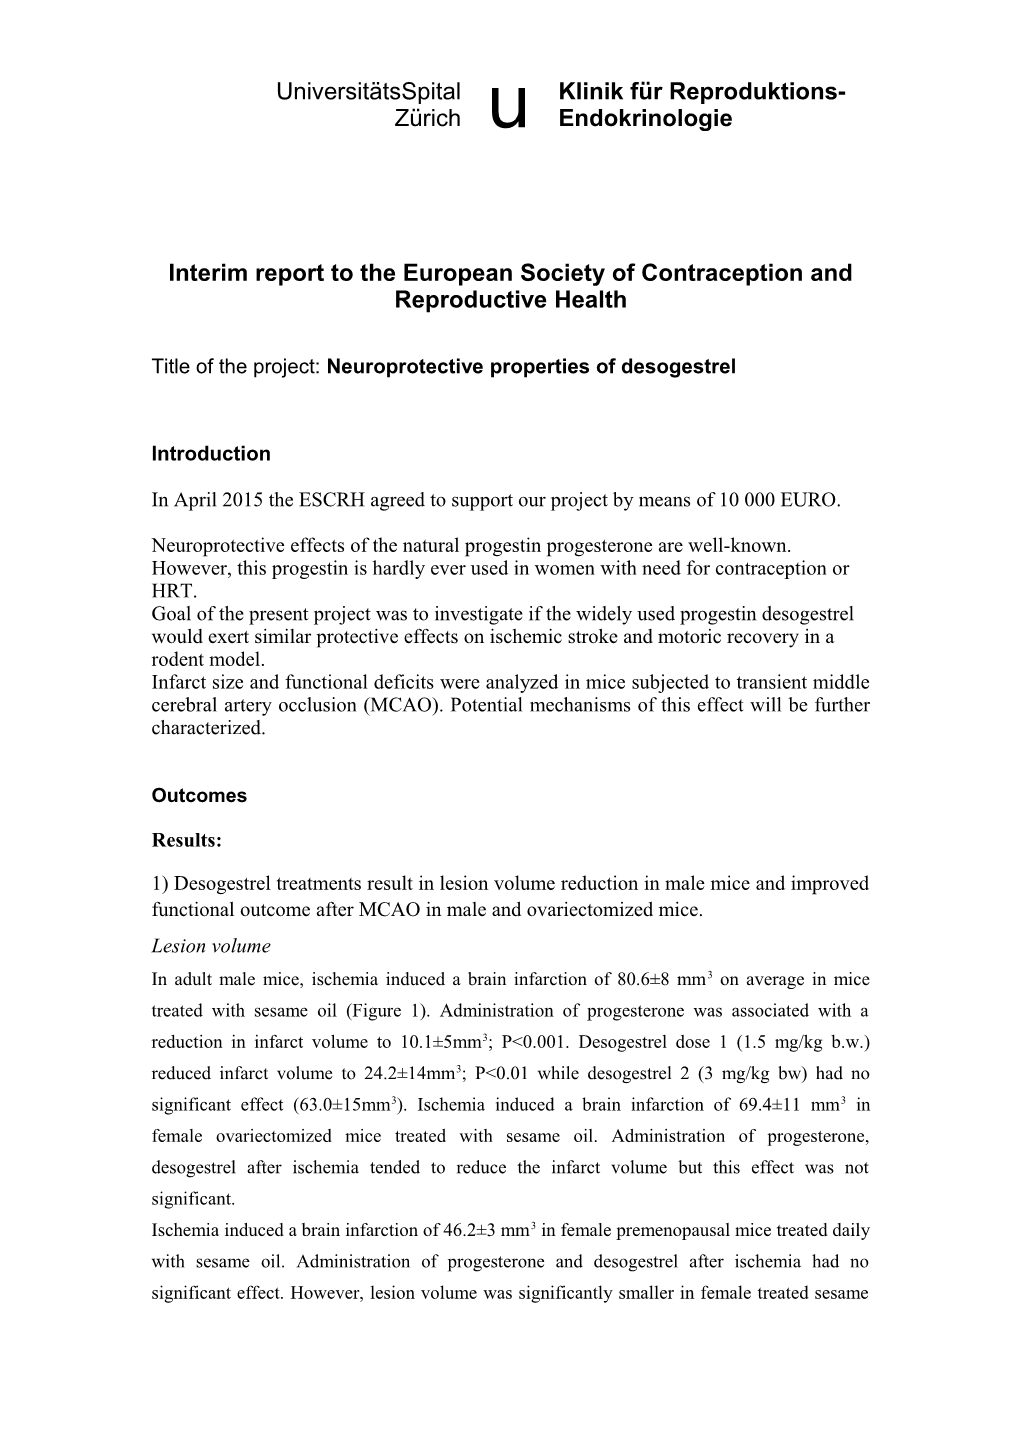 Interim Report to the European Society of Contraception and Reproductive Health